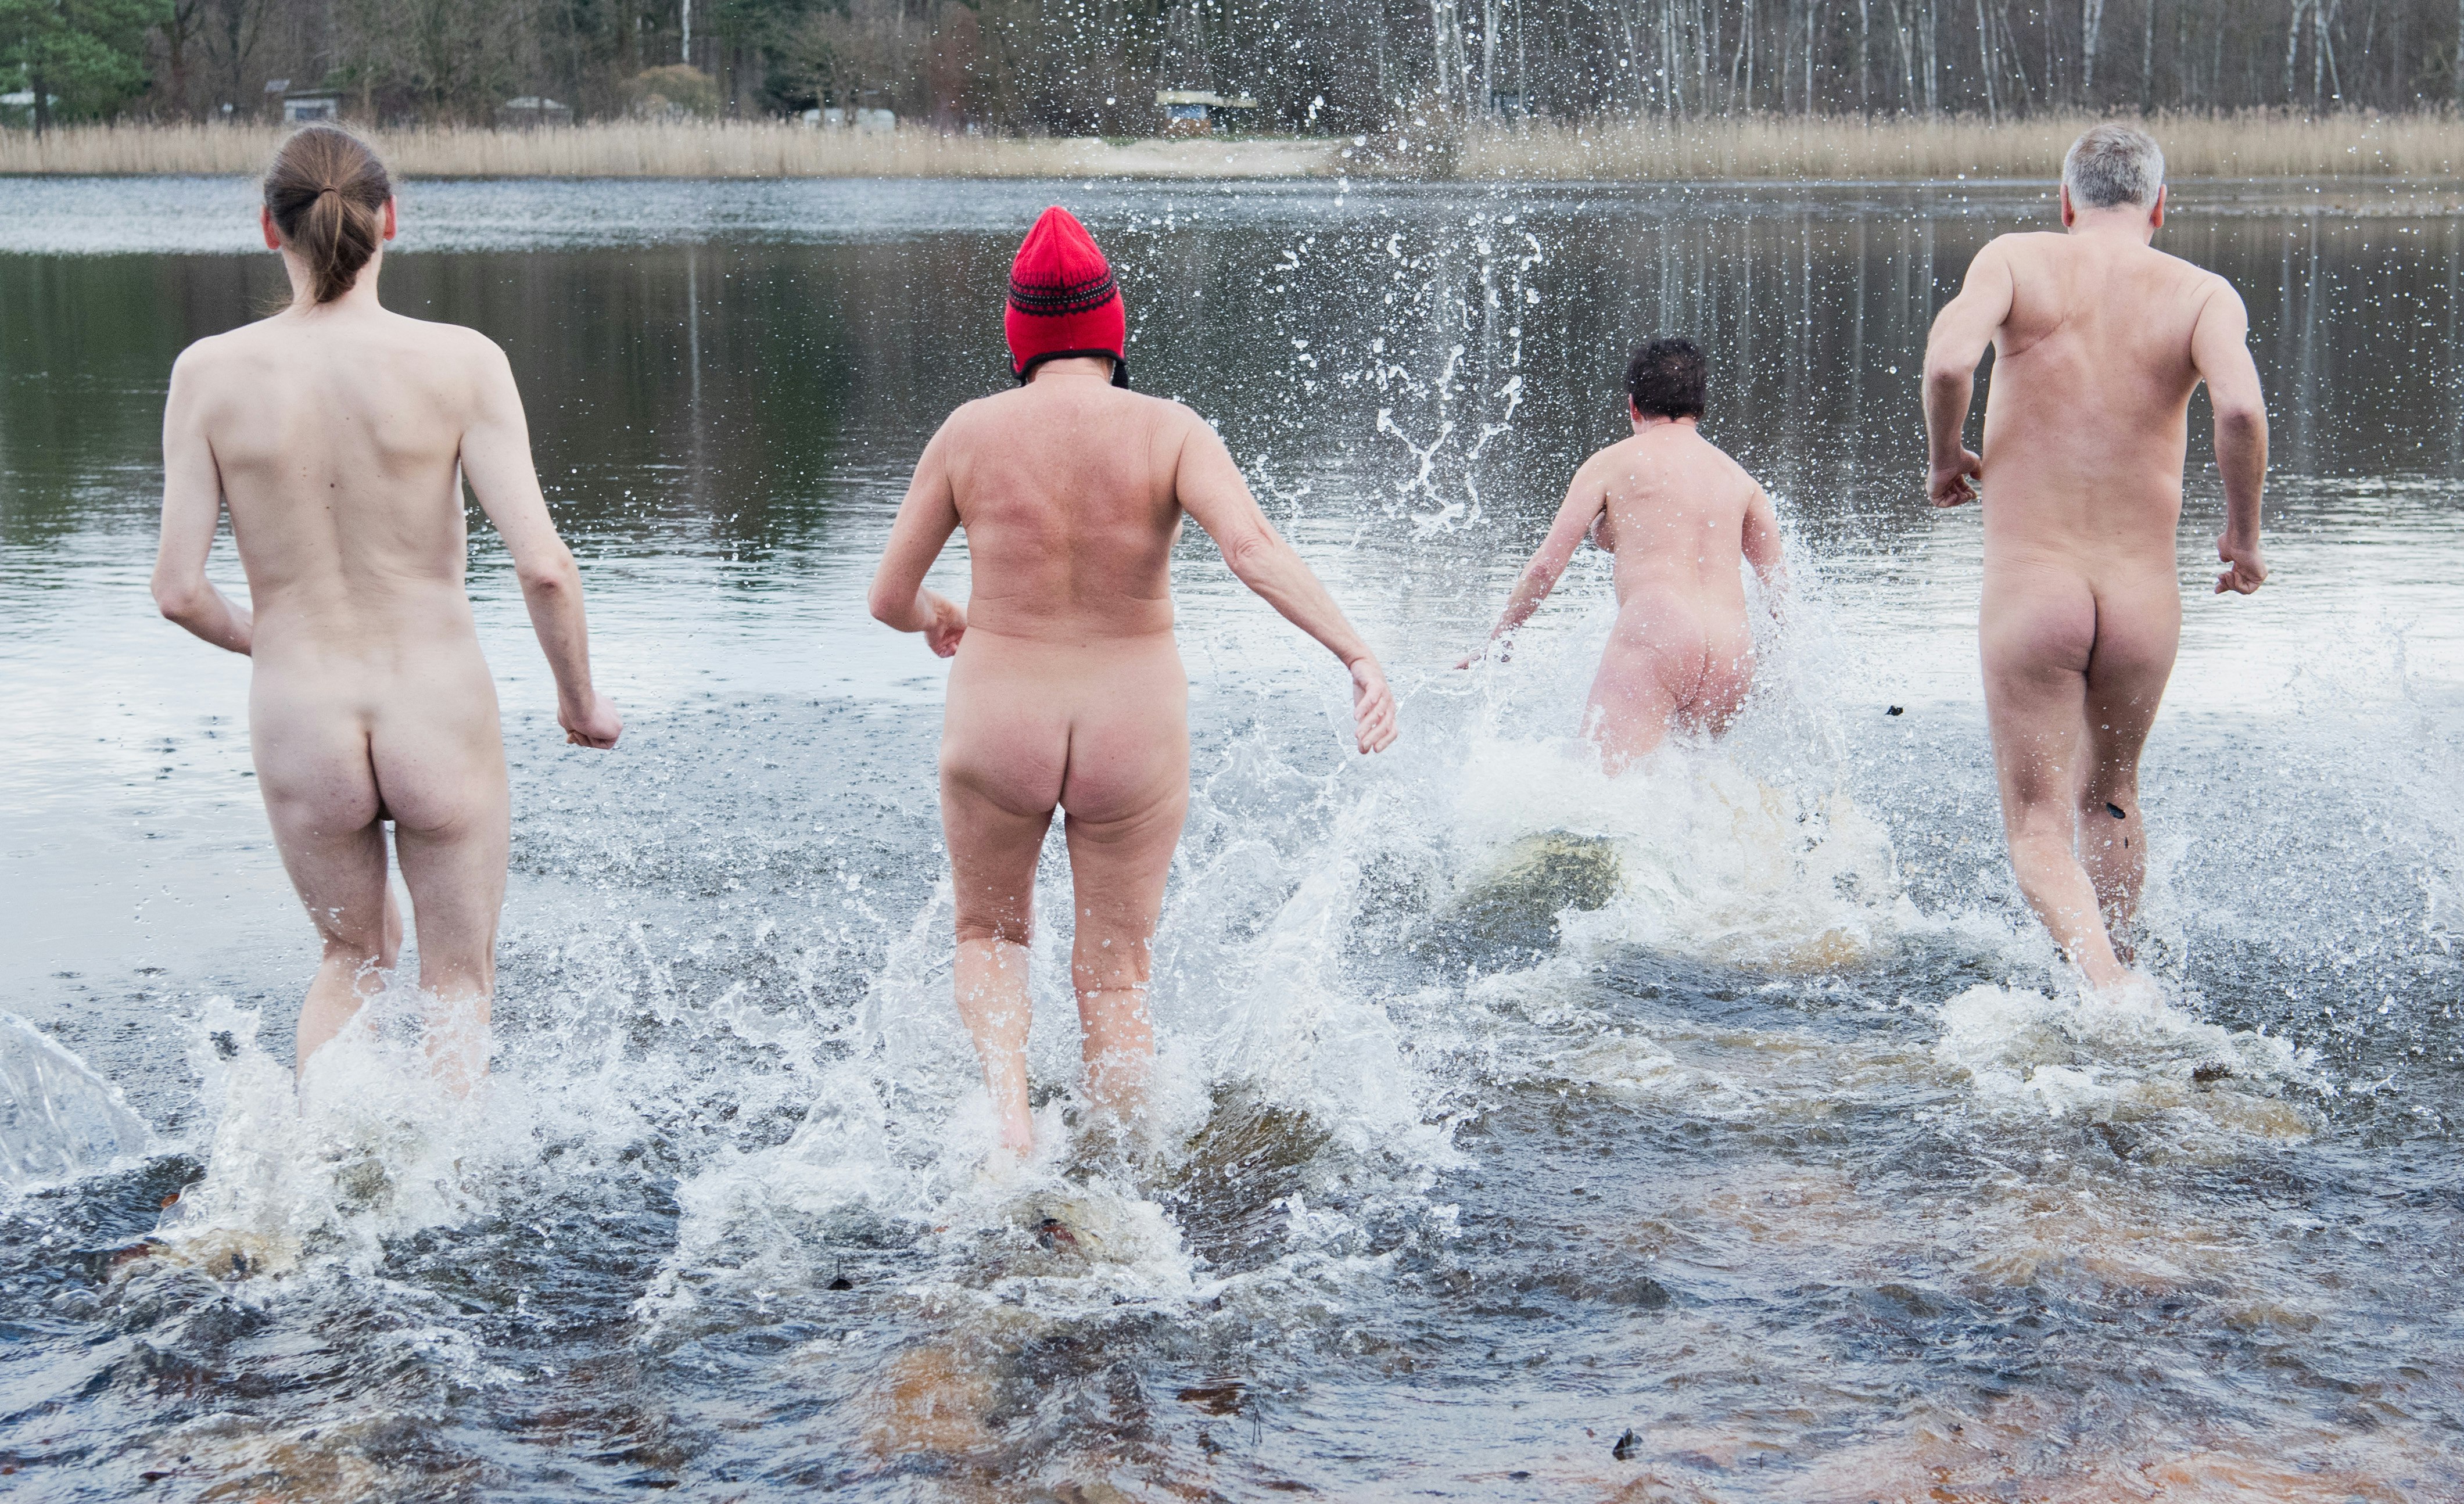 A group of people run into the cold waters in the nude in Hanover Germany. One person is wearing a red wool hat. 